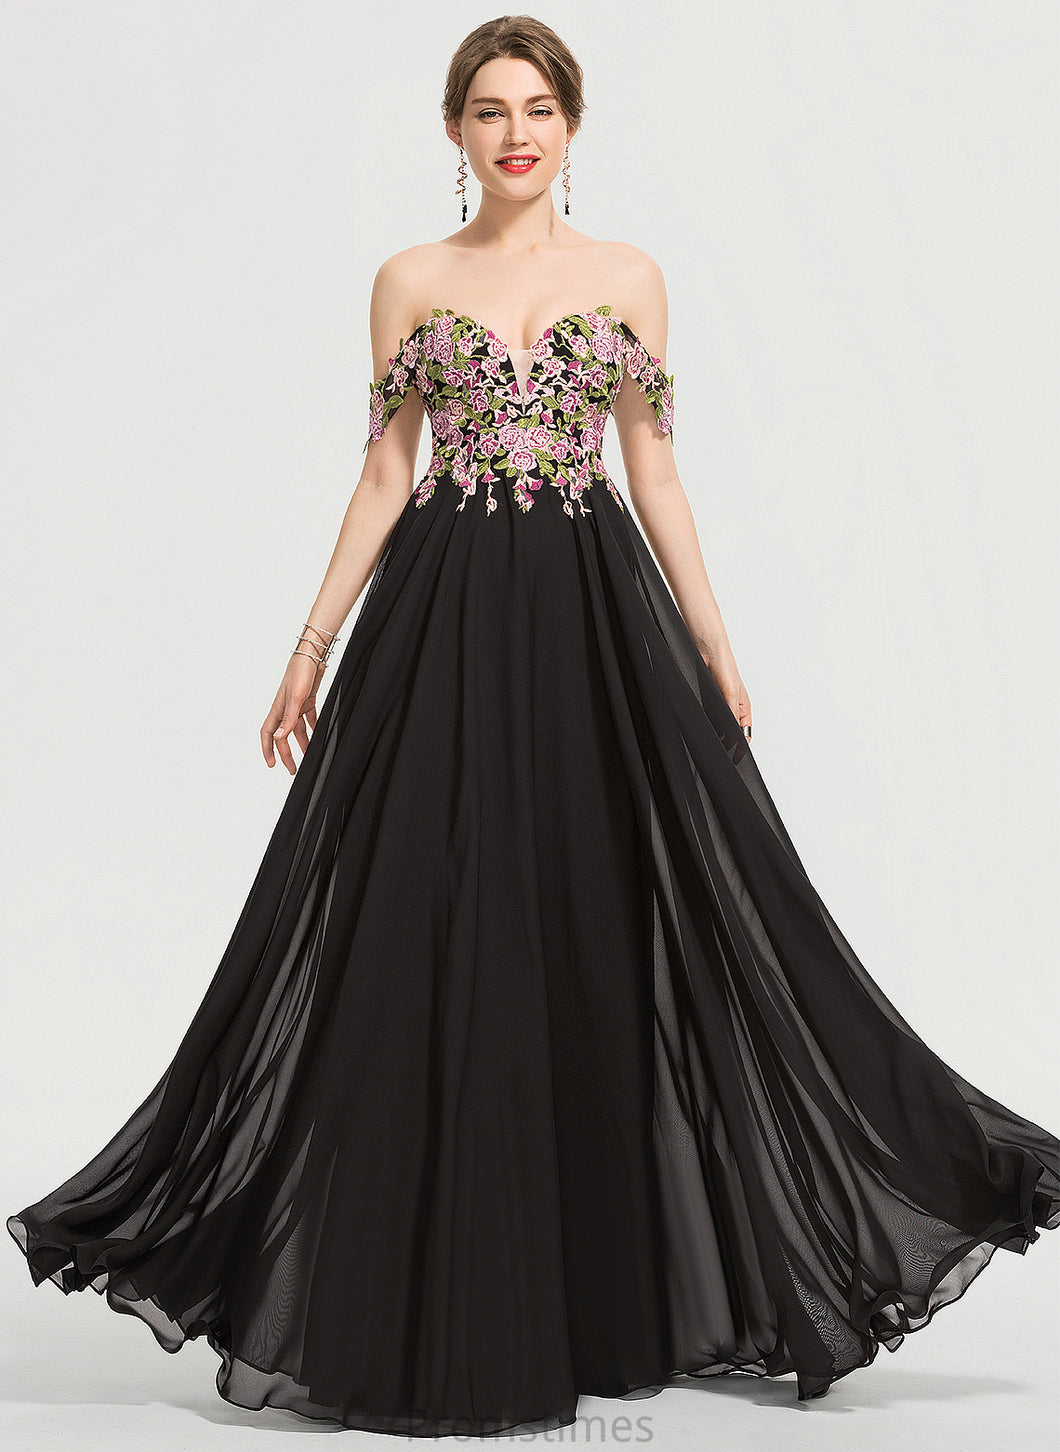 Floor-Length Prom Dresses Lace Ball-Gown/Princess Chiffon Kali Off-the-Shoulder